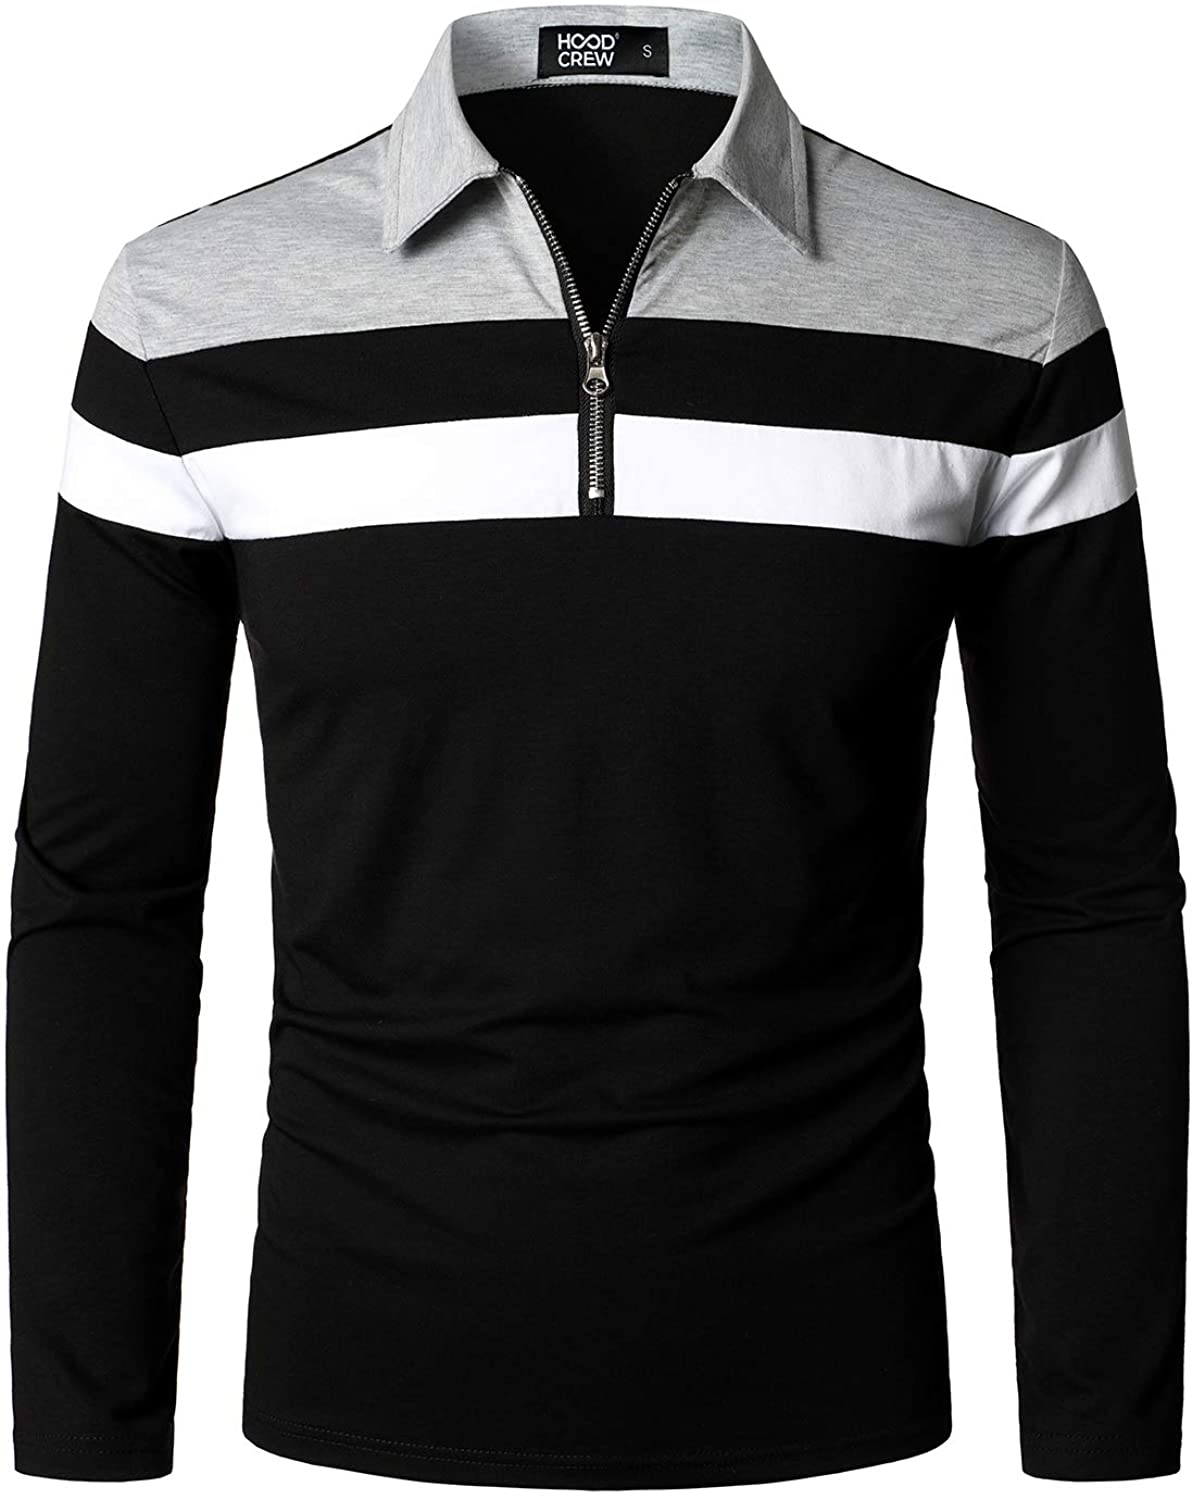 HOOD CREW Men’s Long Sleeve Polo Shirt Casual Slim Fit Shirts Contrast  Color Pat